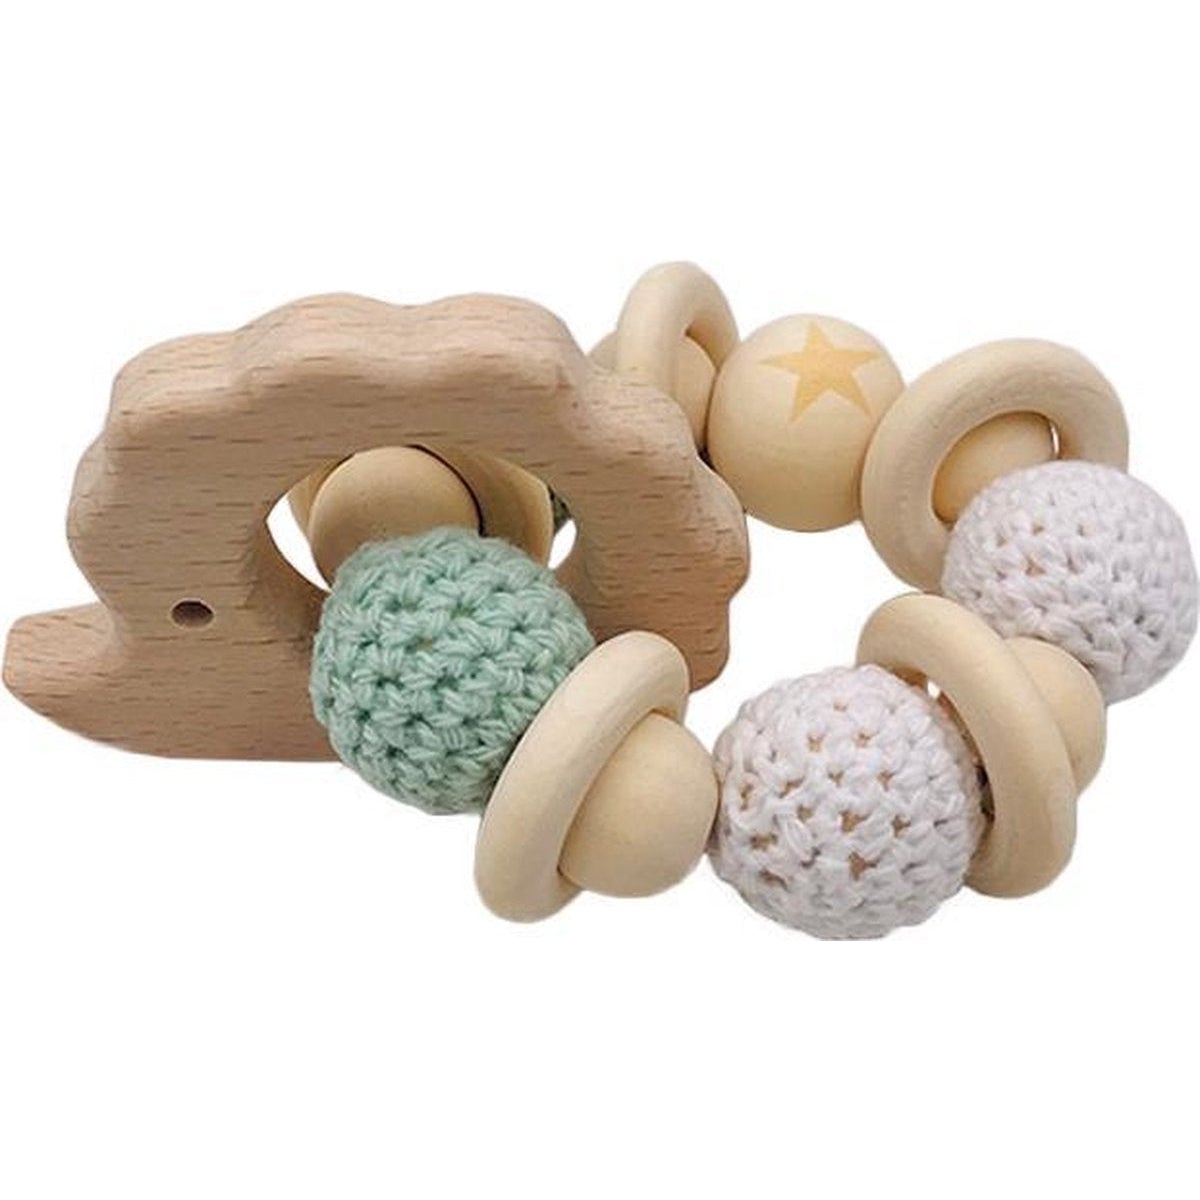 Baby speelgoed - Hout